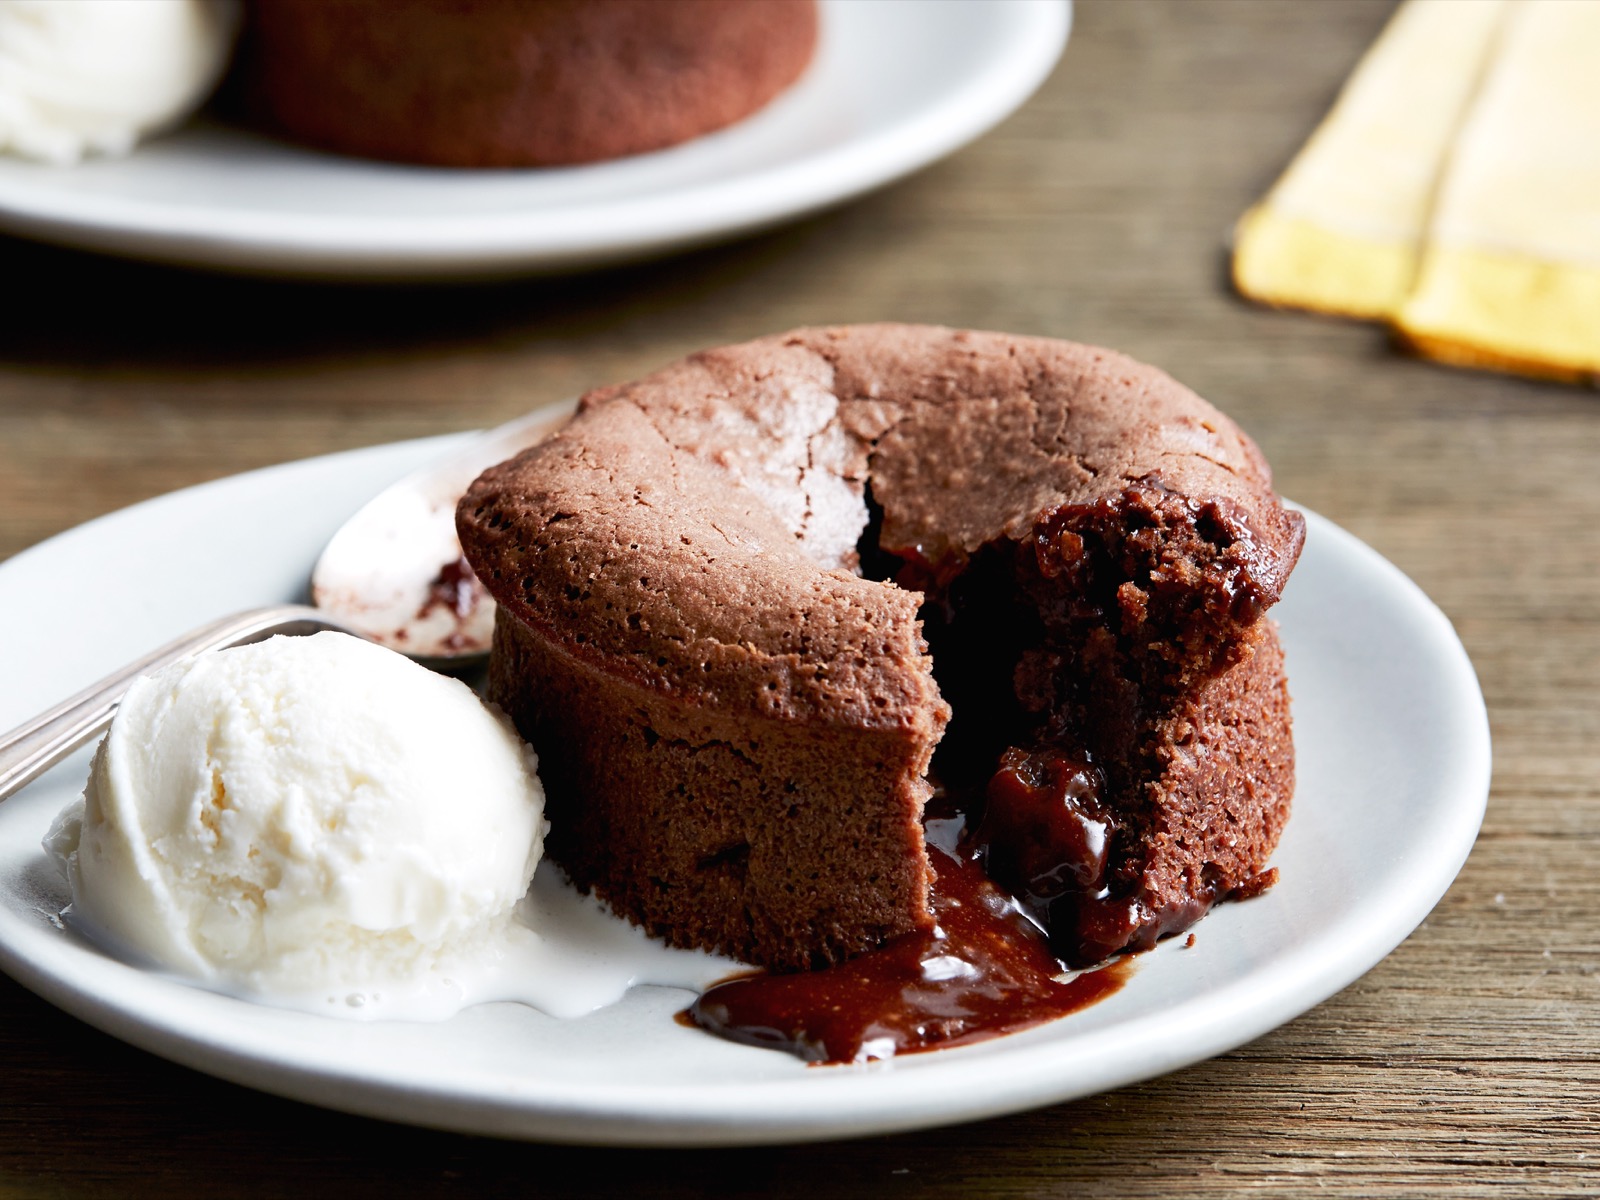 🍔 Plan a Dinner Party With Only Fast Food and We’ll Reveal Your Exact Age Chocolate Lava Cake